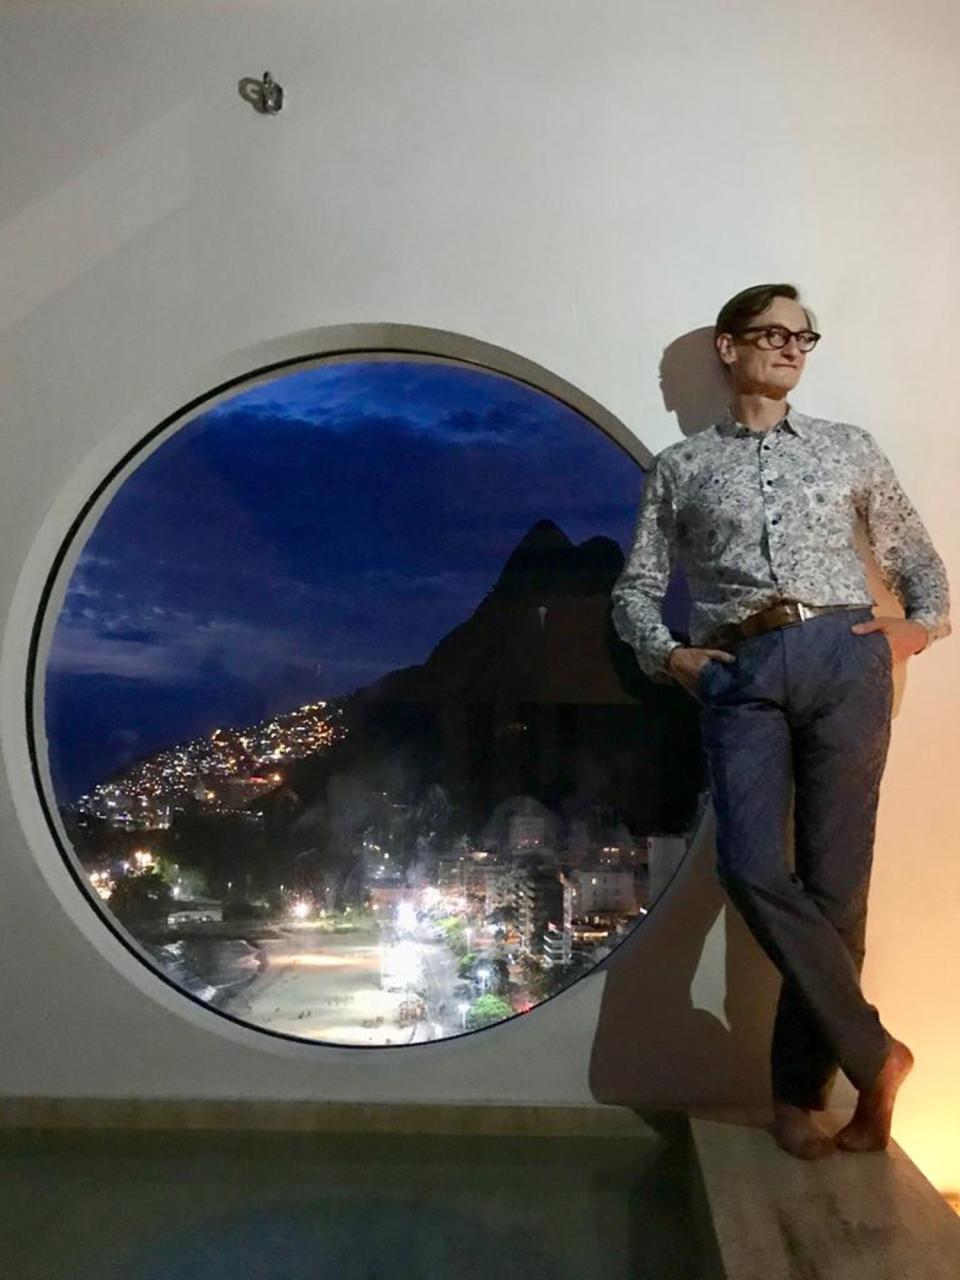 Yours Truly strikes a pose at the rooftop pool of the Janeiro Hotel in Leblon, its window framing the peaks of the Two Brothers mountains.